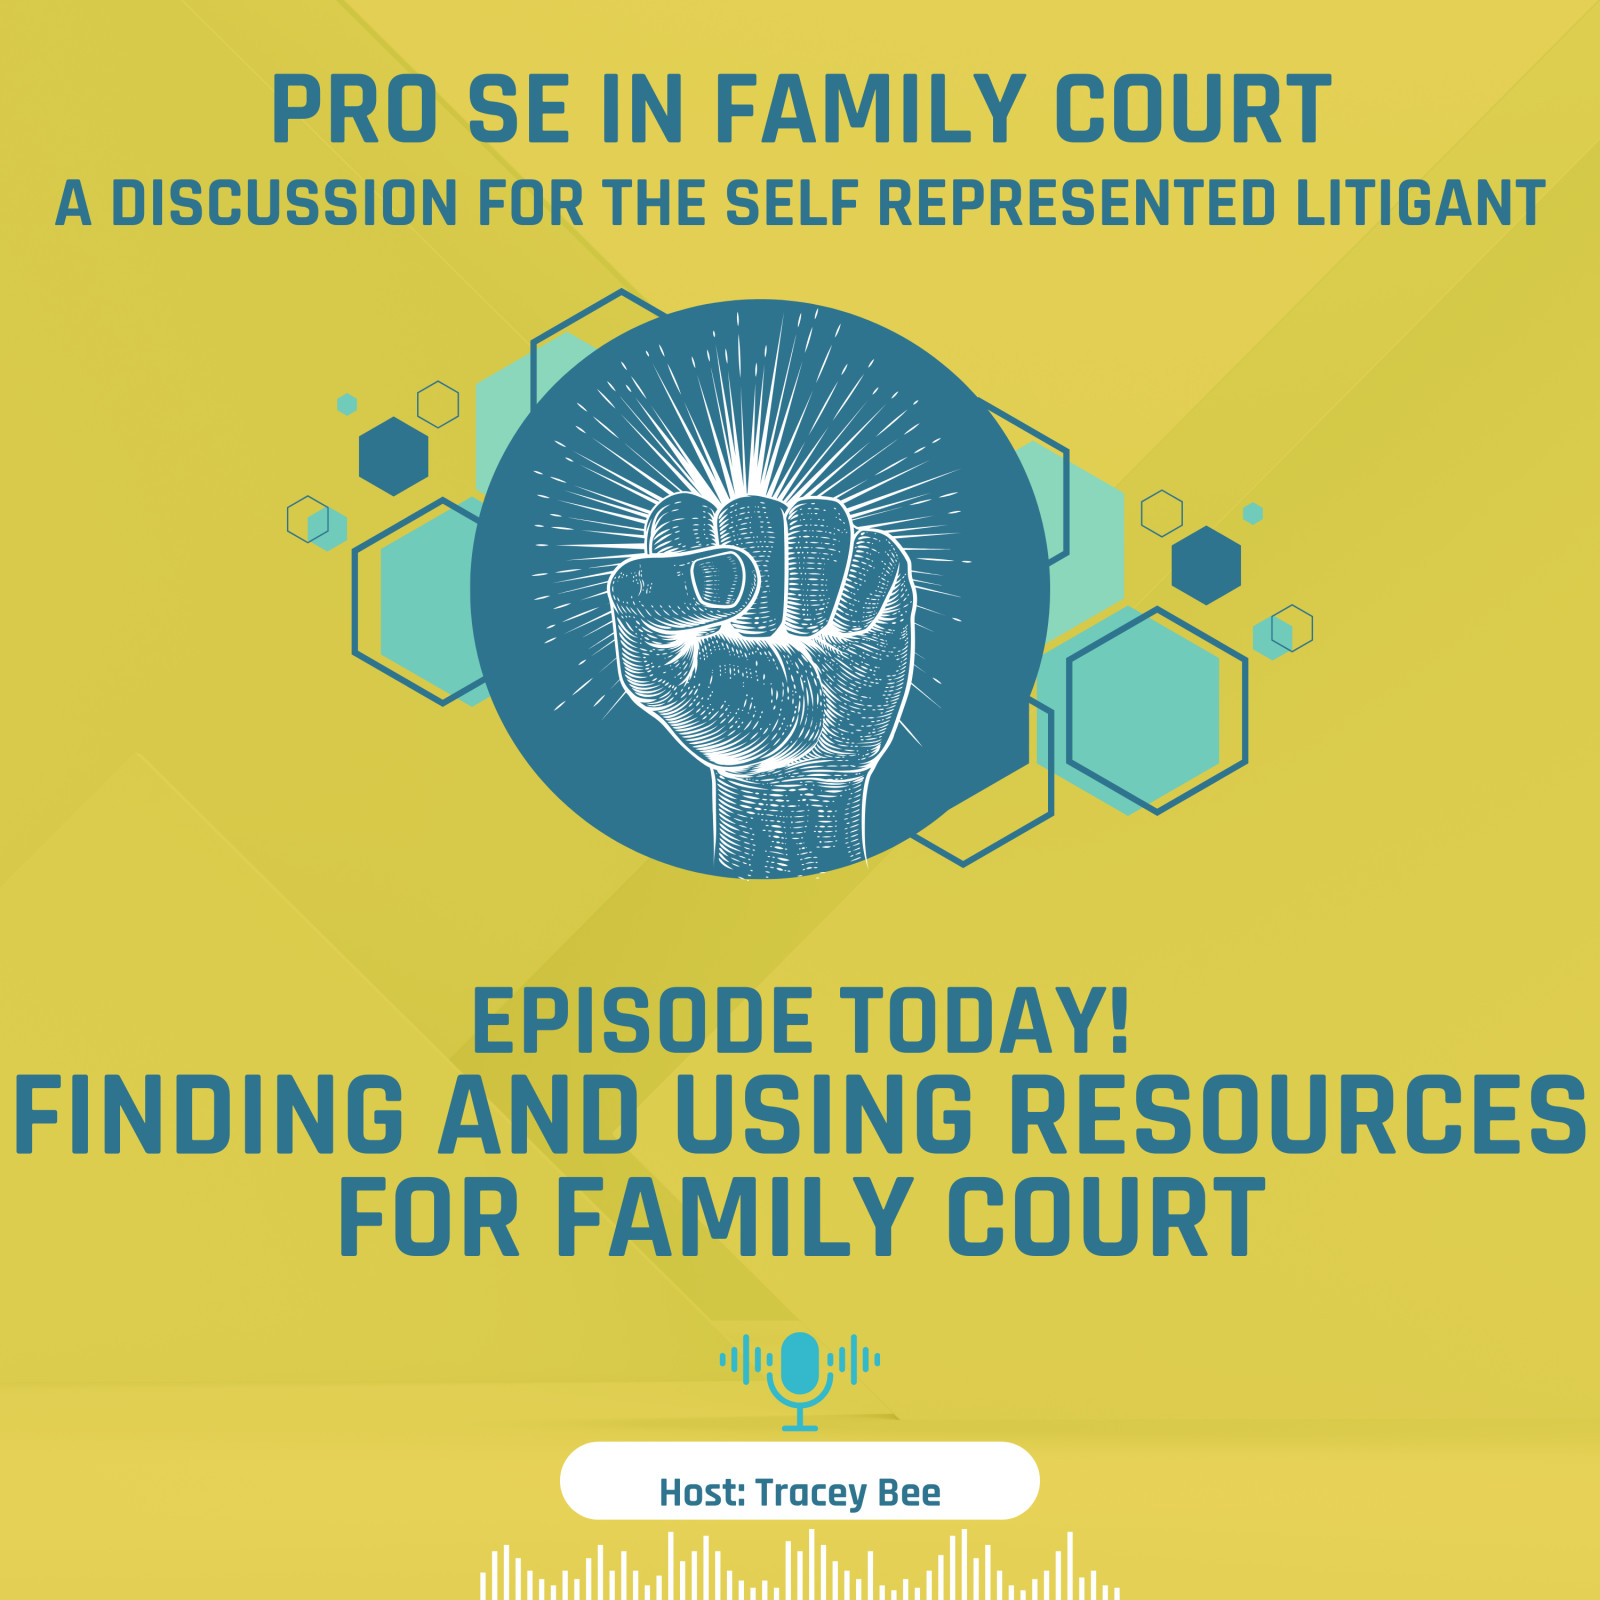 Episode 8: Finding and Using Resources for Family Court